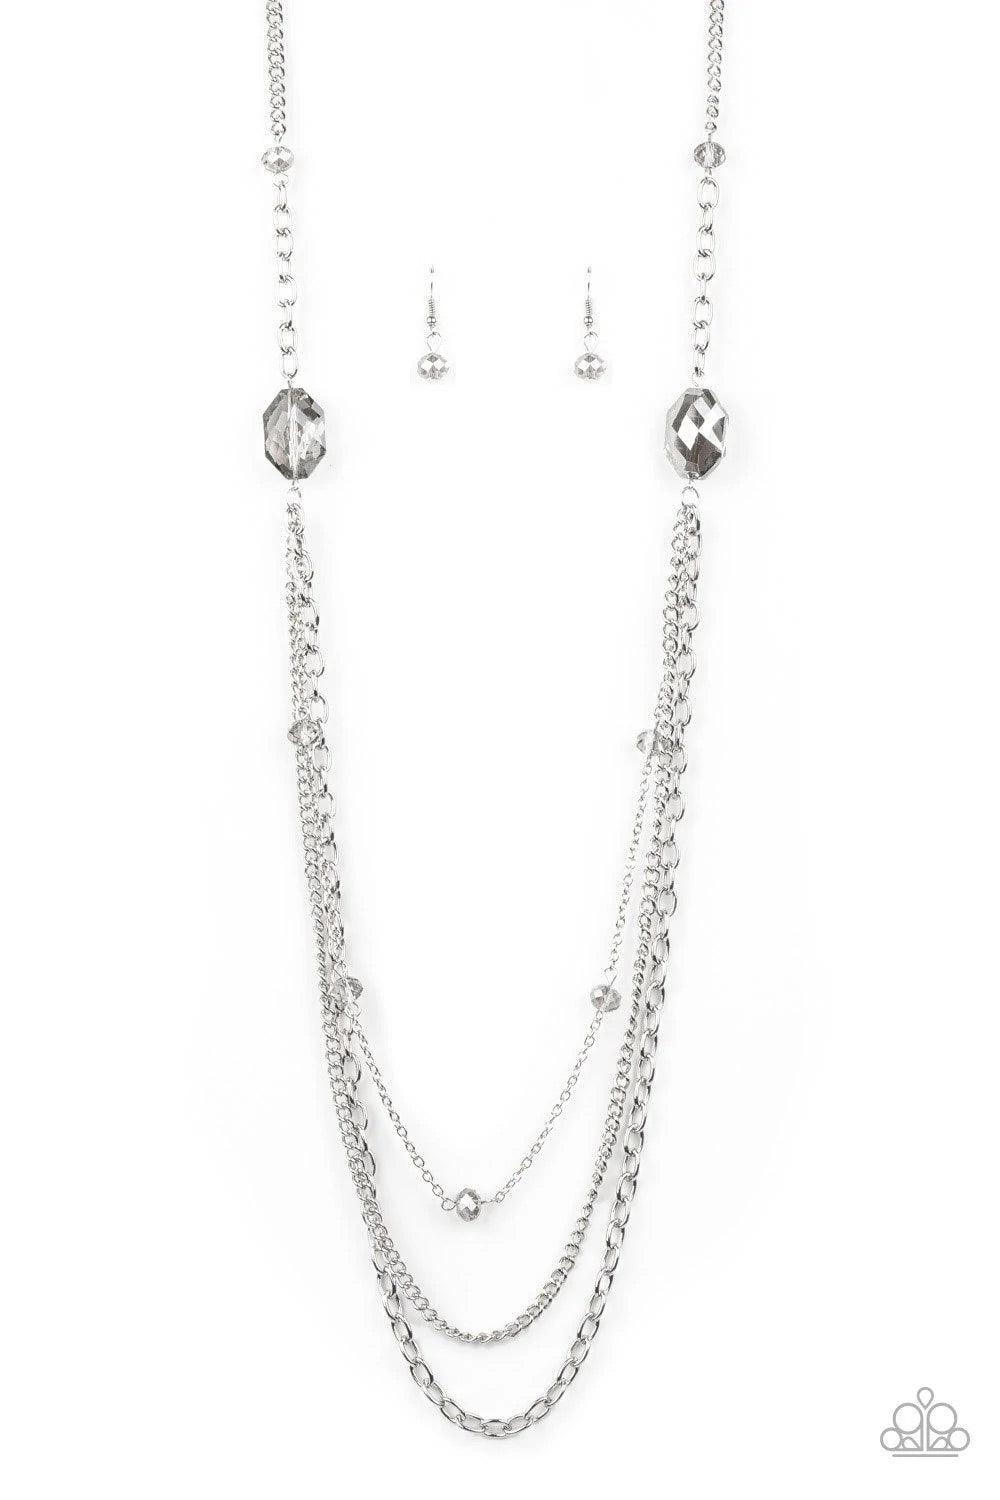 Paparazzi Accessories Dare To Dazzle - Silver Infused with metallic crystal-like beads, a pair of glittery metallic gems gives way to layers of mismatched silver chains for a dazzling look. Features an adjustable clasp closure. Sold as one individual neck